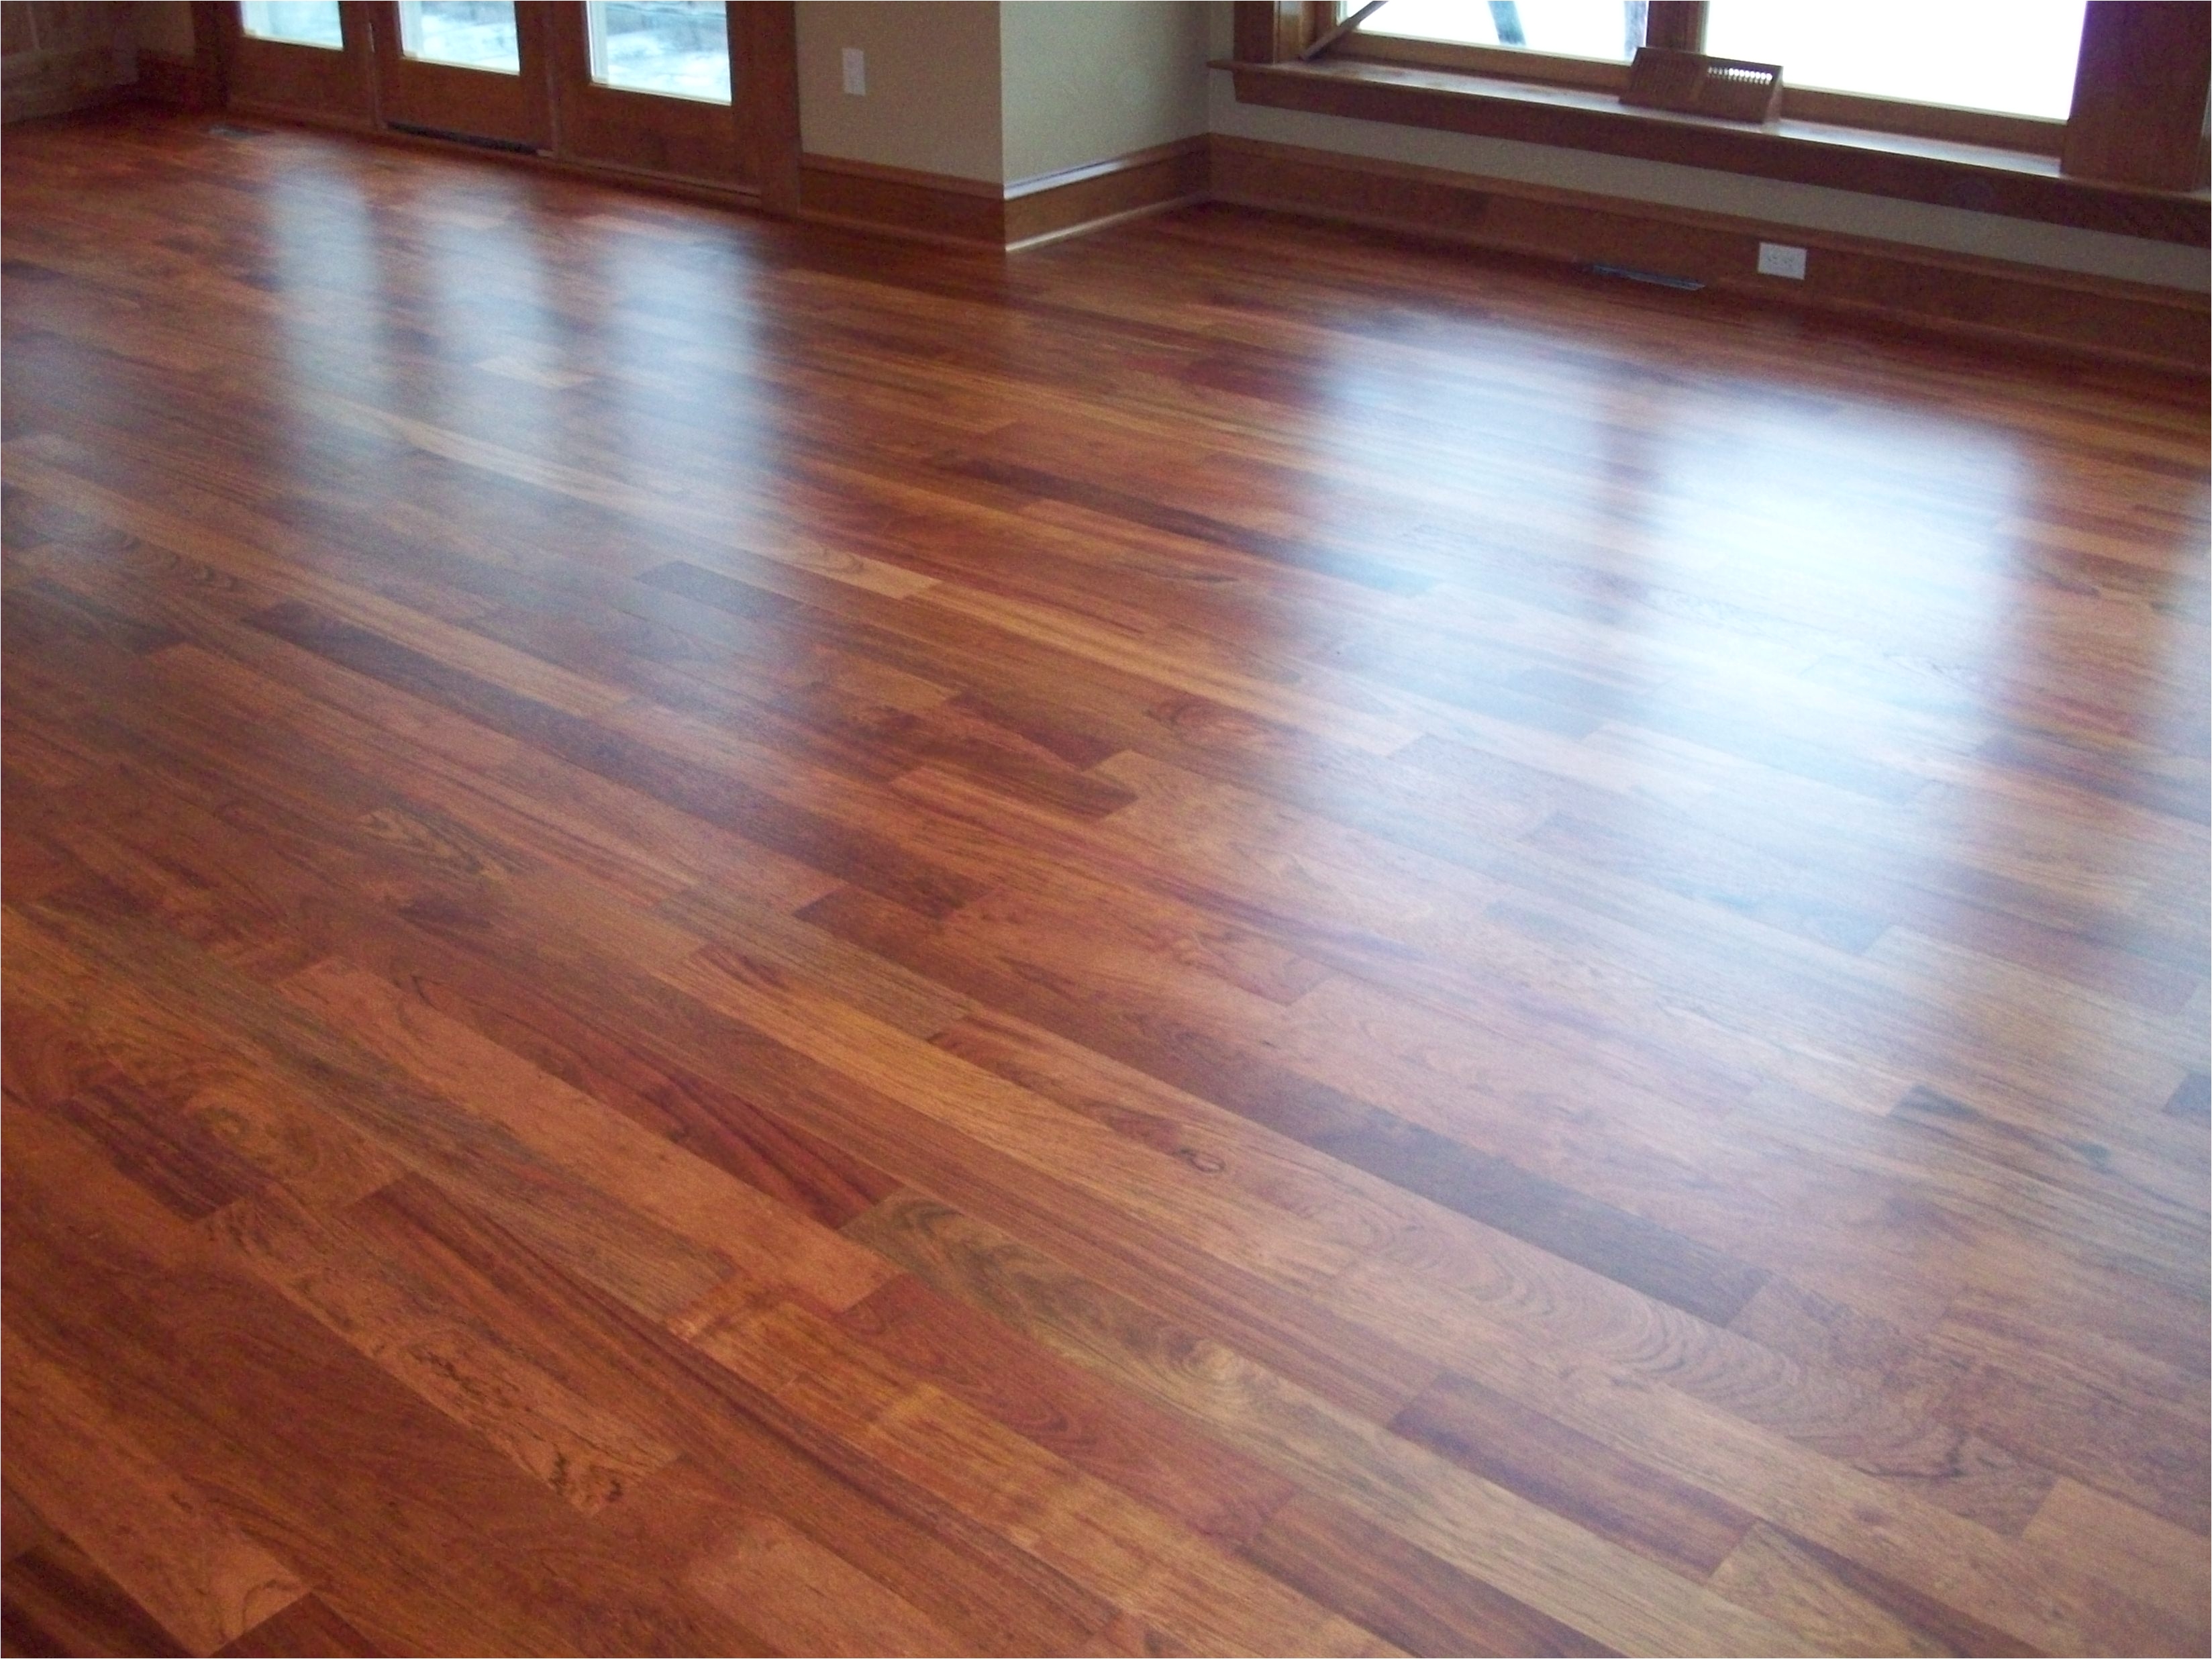 full size of bedroom fascinating discount hardwood flooring 12 8236915 discount hardwood flooring ohio